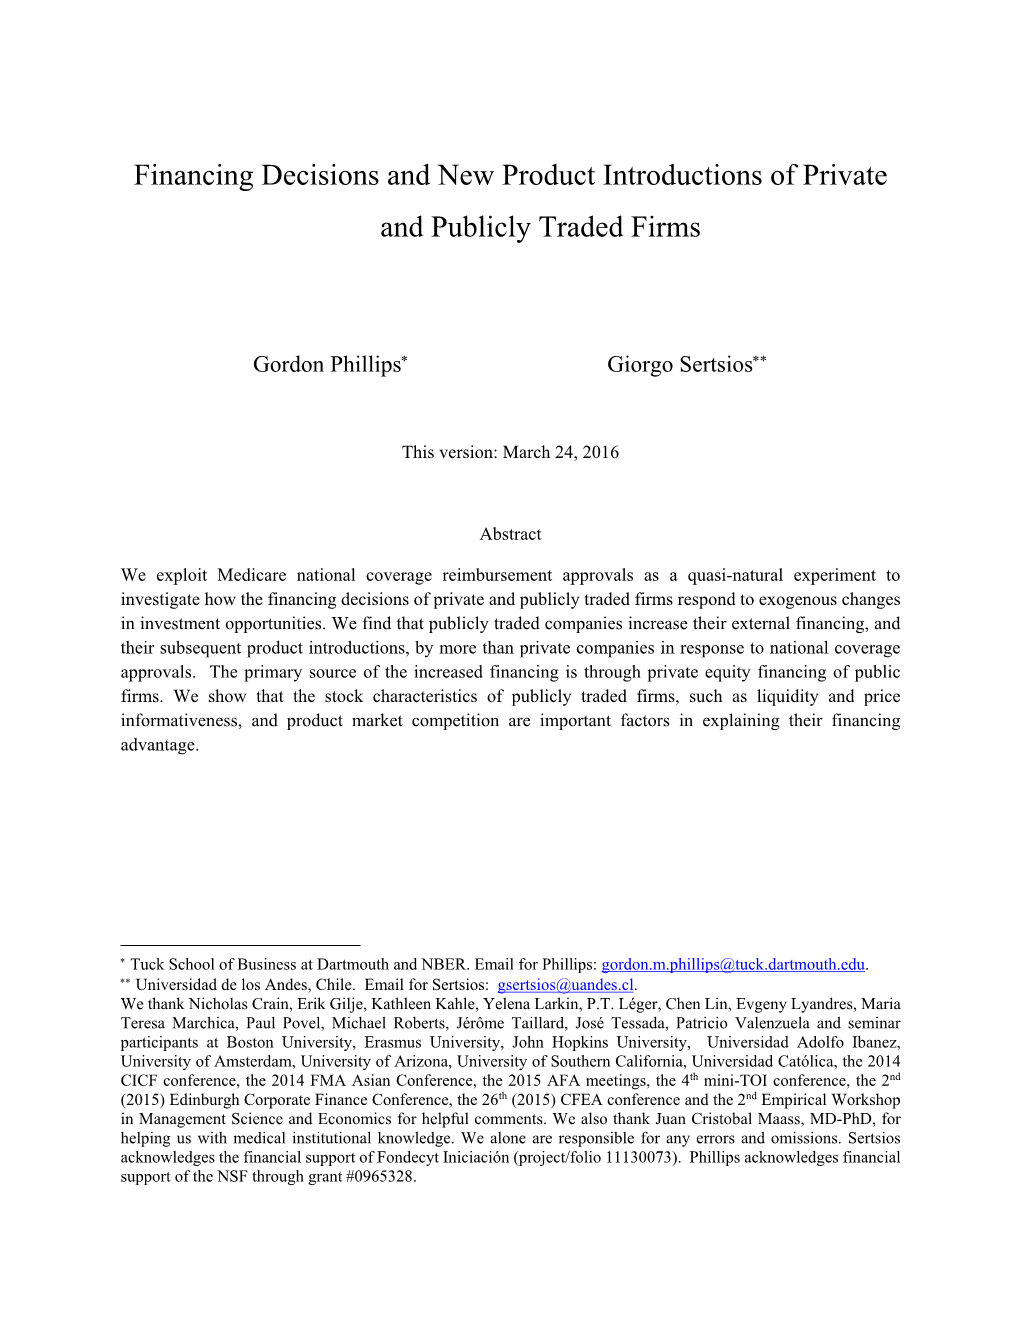 Financing Decisions and New Product Introductions of Private and Publicly Traded Firms